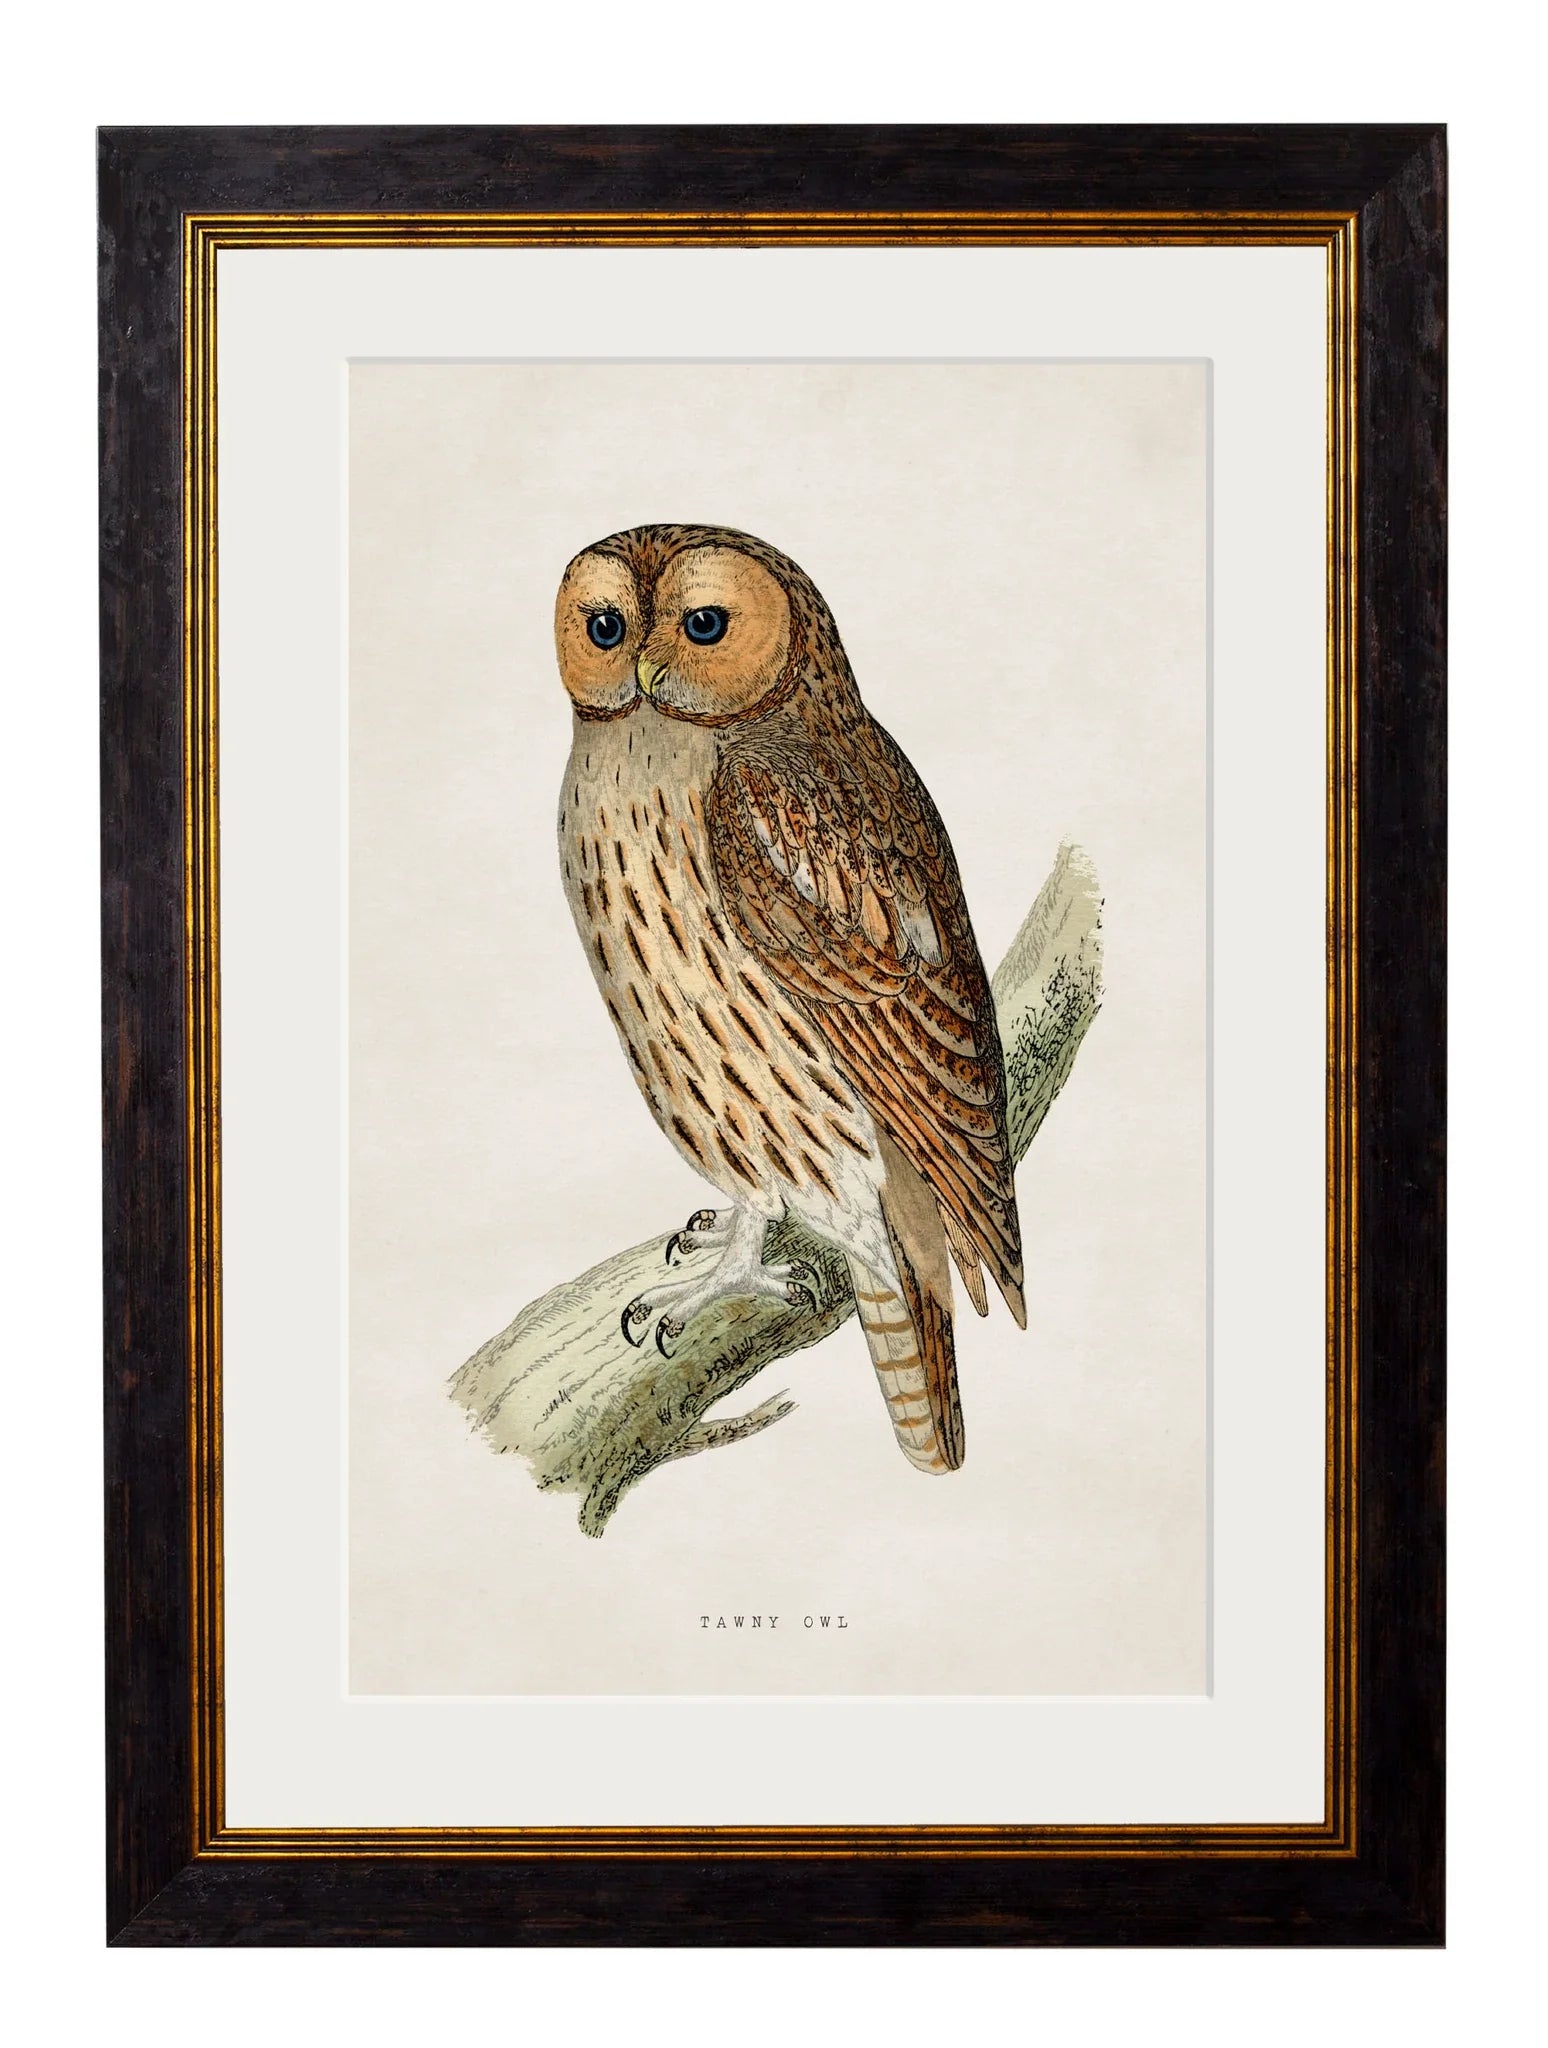 C.1870 British Owls Frames for sale - Woodcock and Cavendish